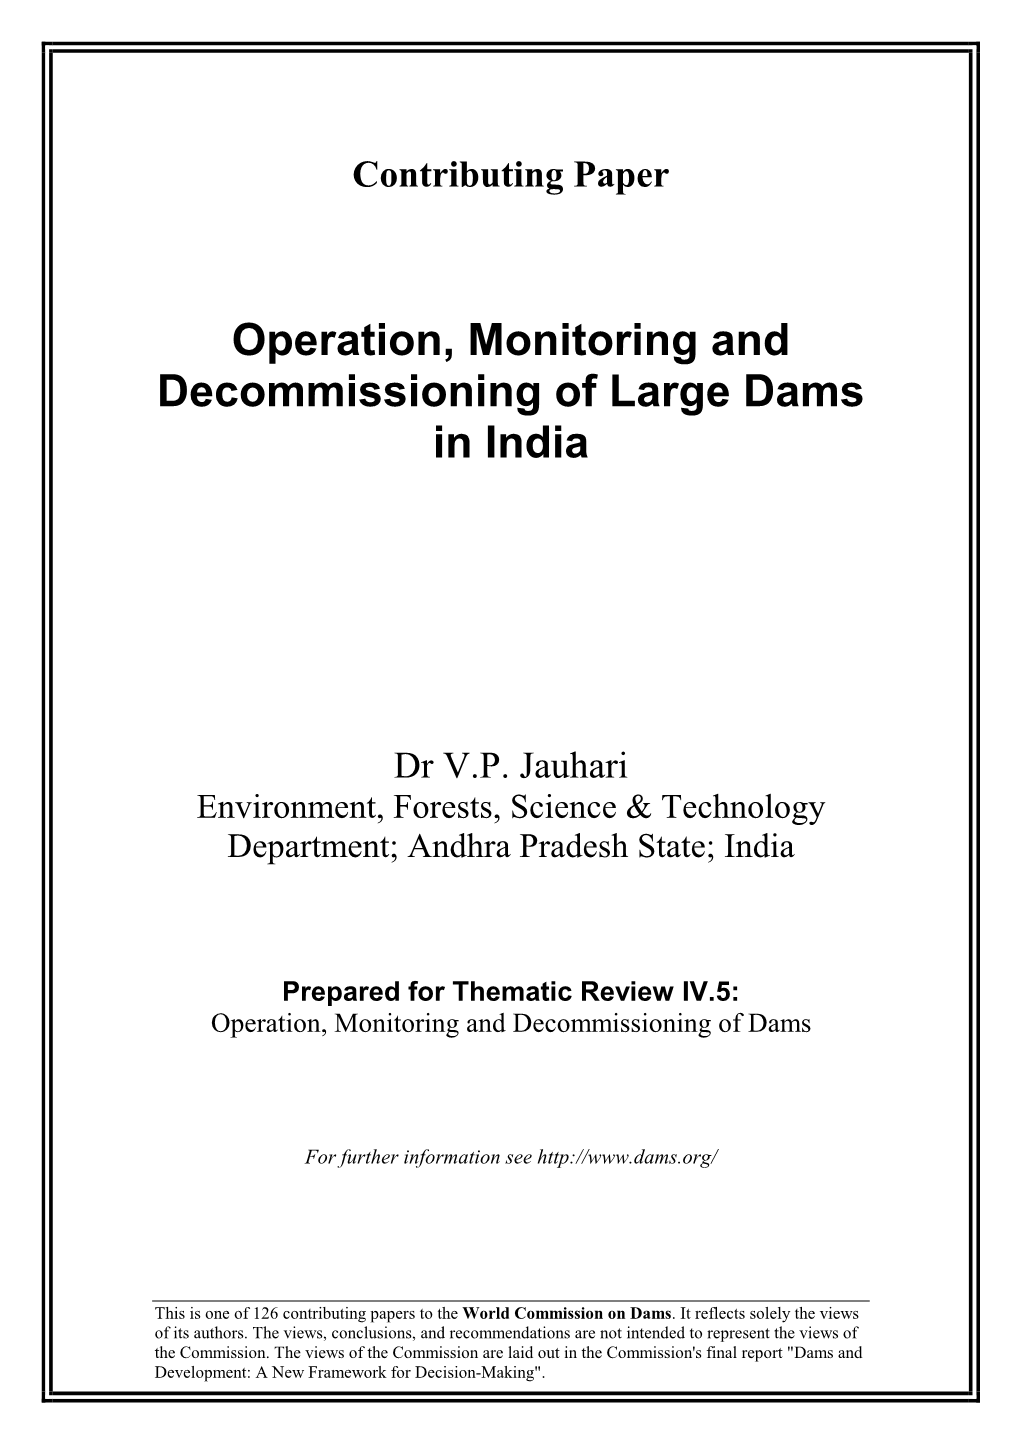 Operation, Monitoring and Decommissioning of Large Dams in India